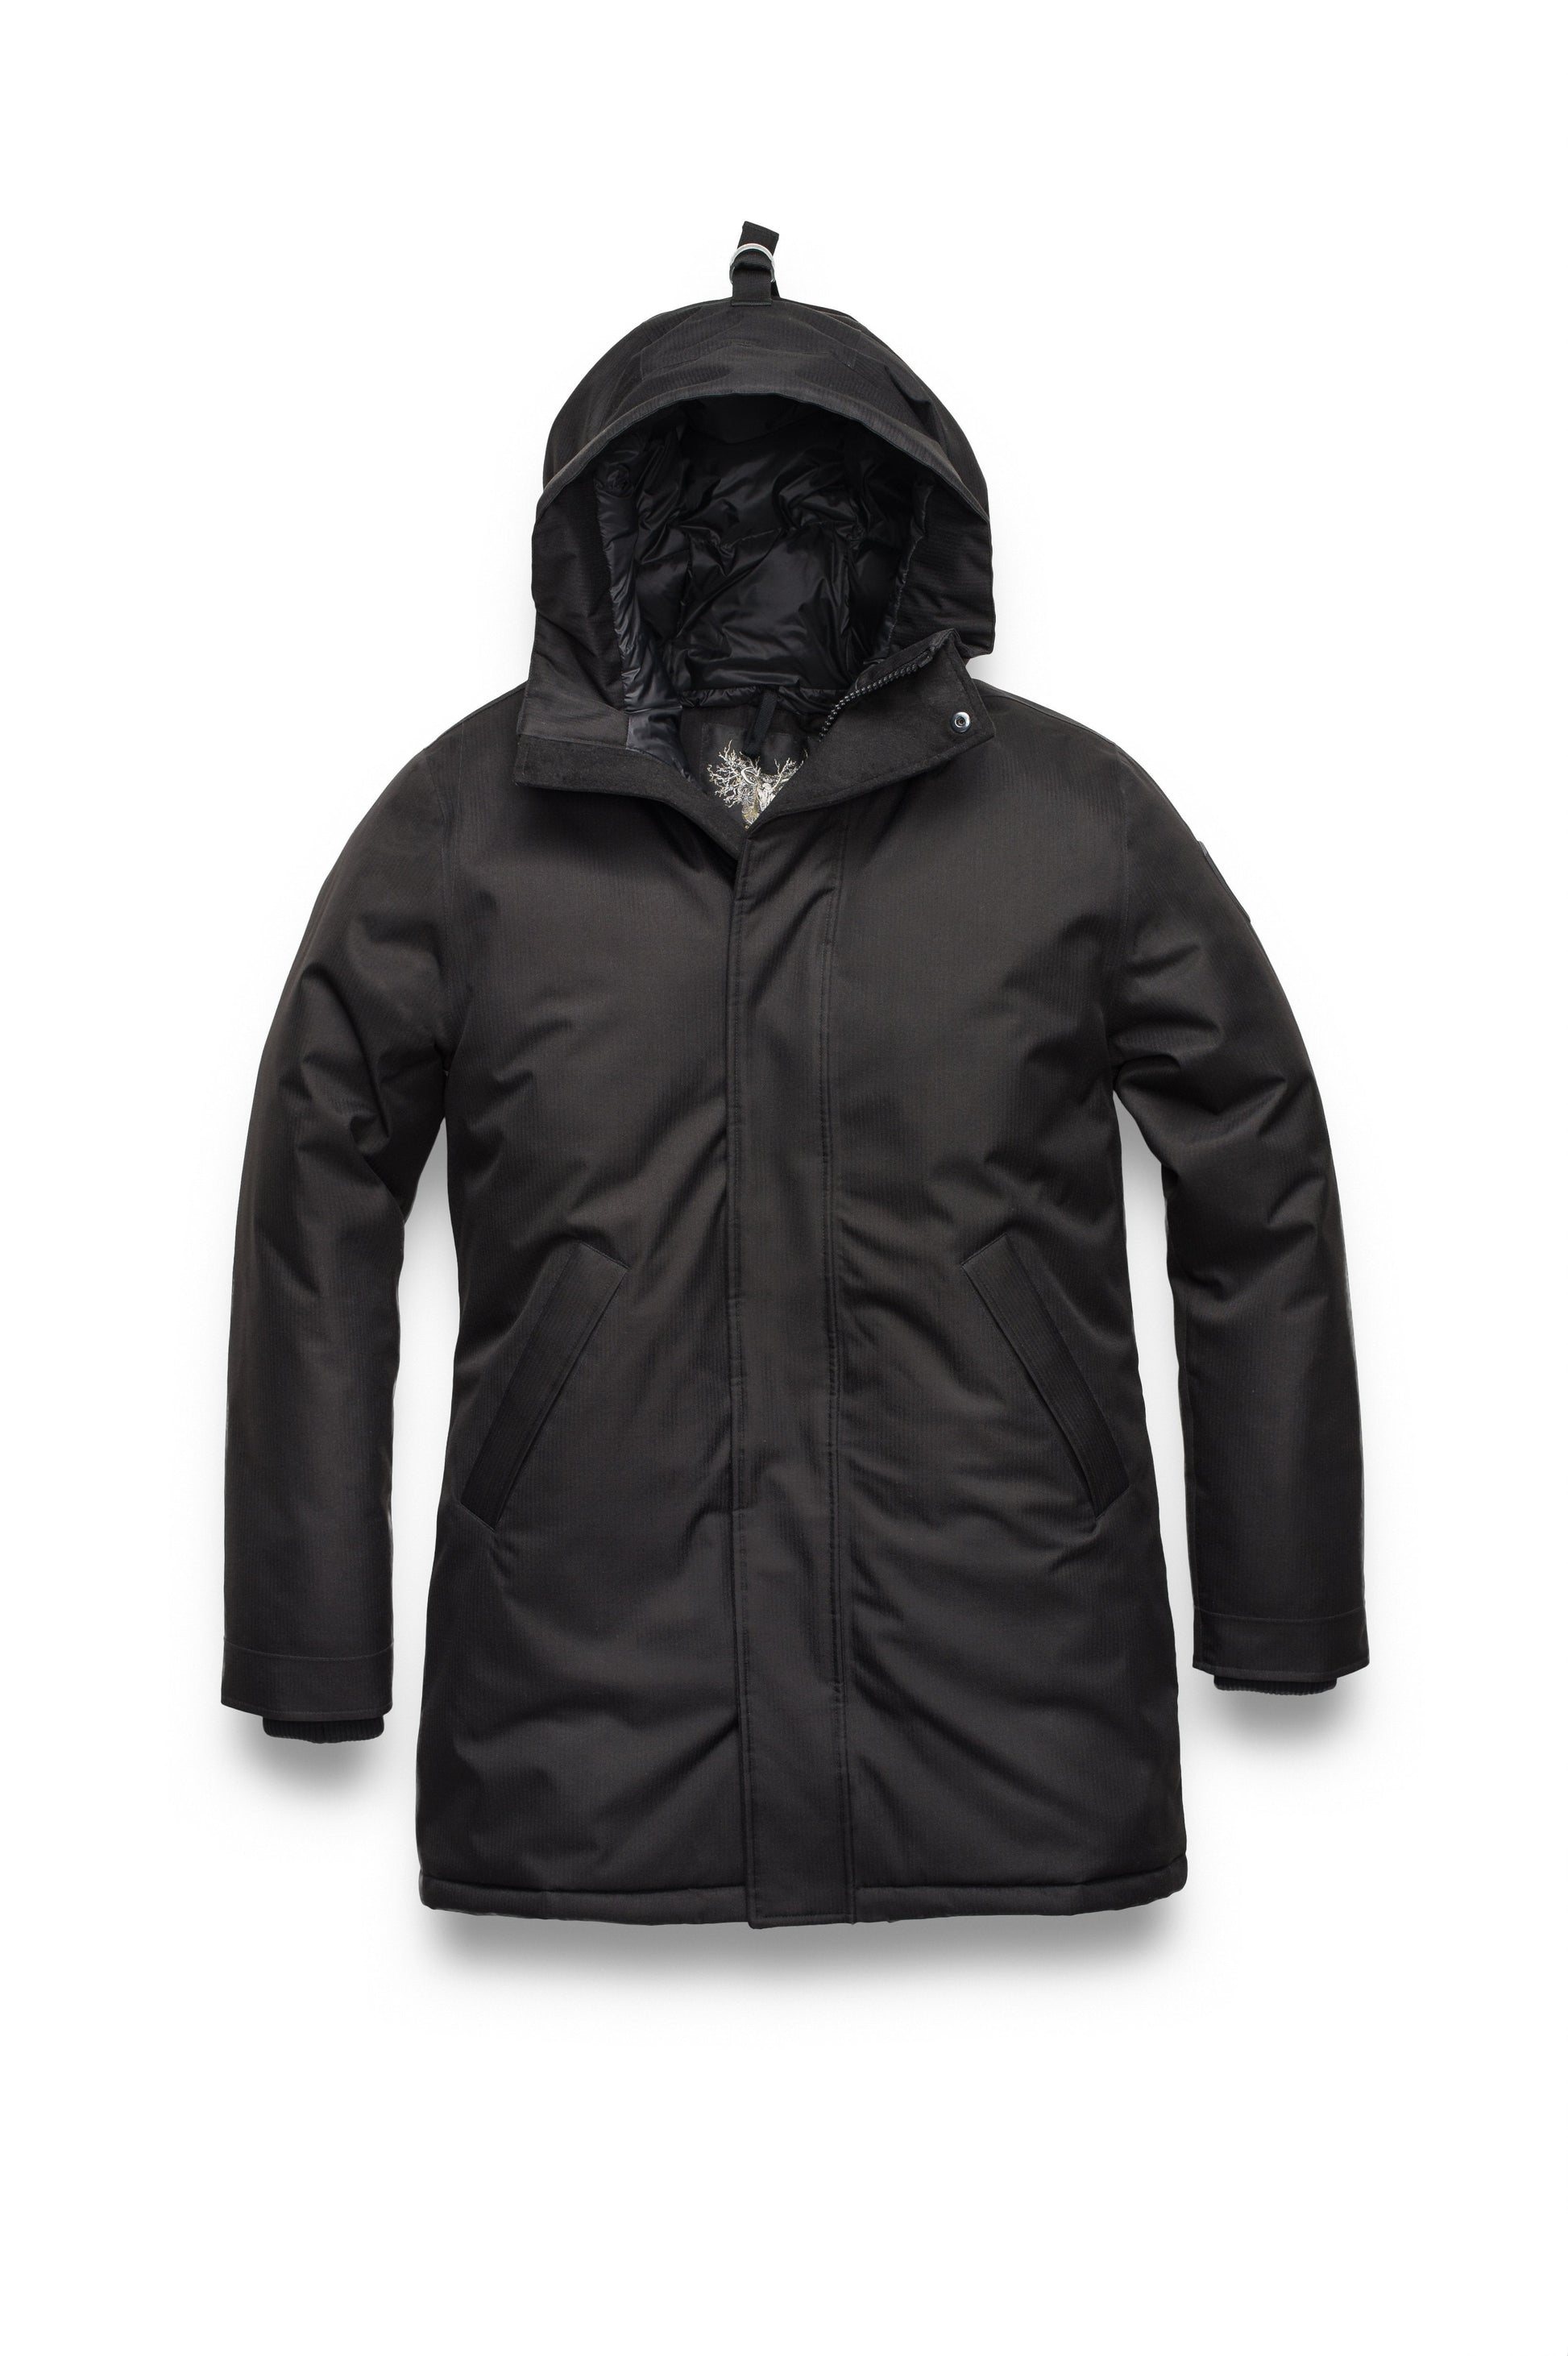 Pierre Men's Jacket in thigh length, Canadian white duck down insulation, non-removable down-filled hood, angled waist pockets, centre-front zipper with wind flap, and elastic ribbed cuffs, in Black